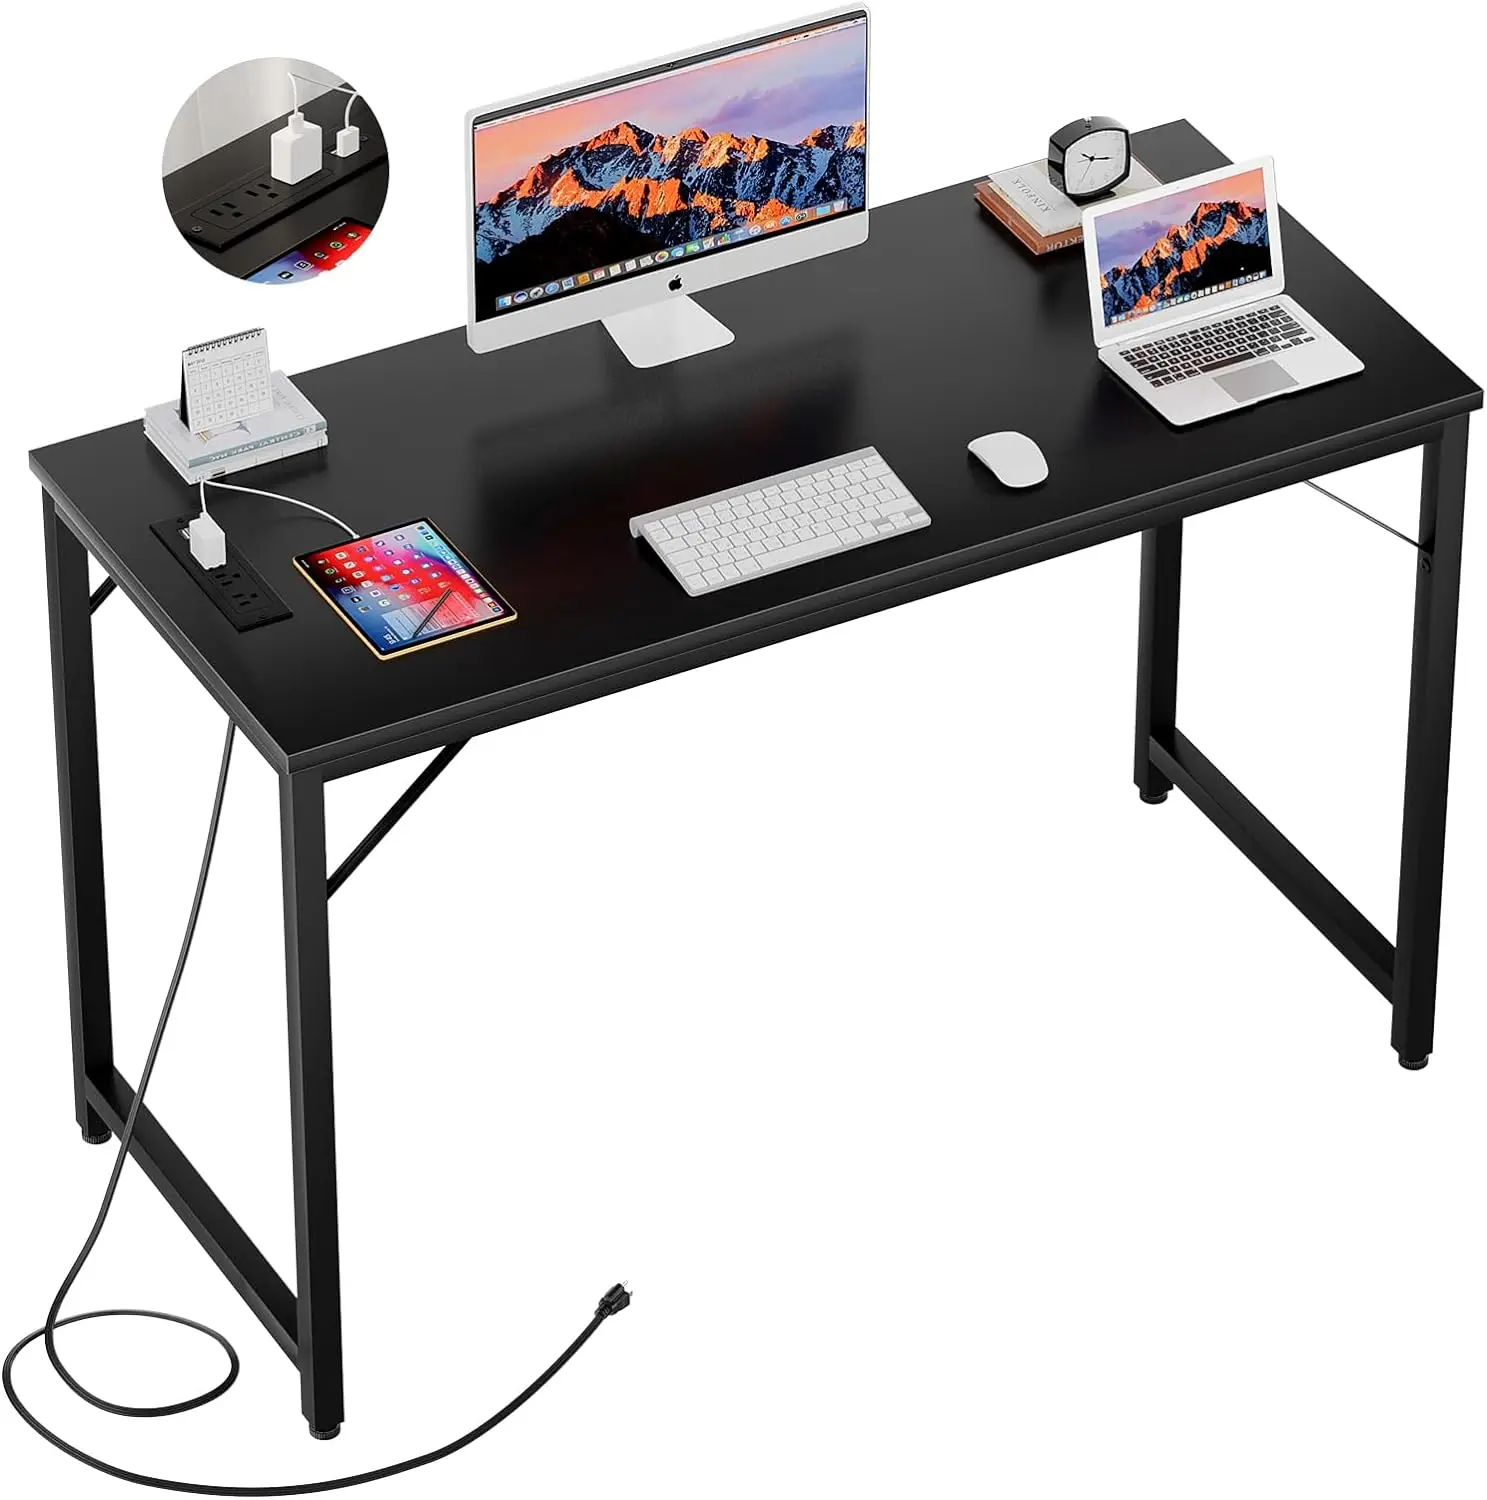 47 Inch Computer Desk with Magic Power Outlets, Modern Office Desk with USB Charging Ports, Sturdy Student Writing Desk 6pcs early education copybook reusable magic copy book writing groove number alphabet wordpad for kid book calligraphic practice